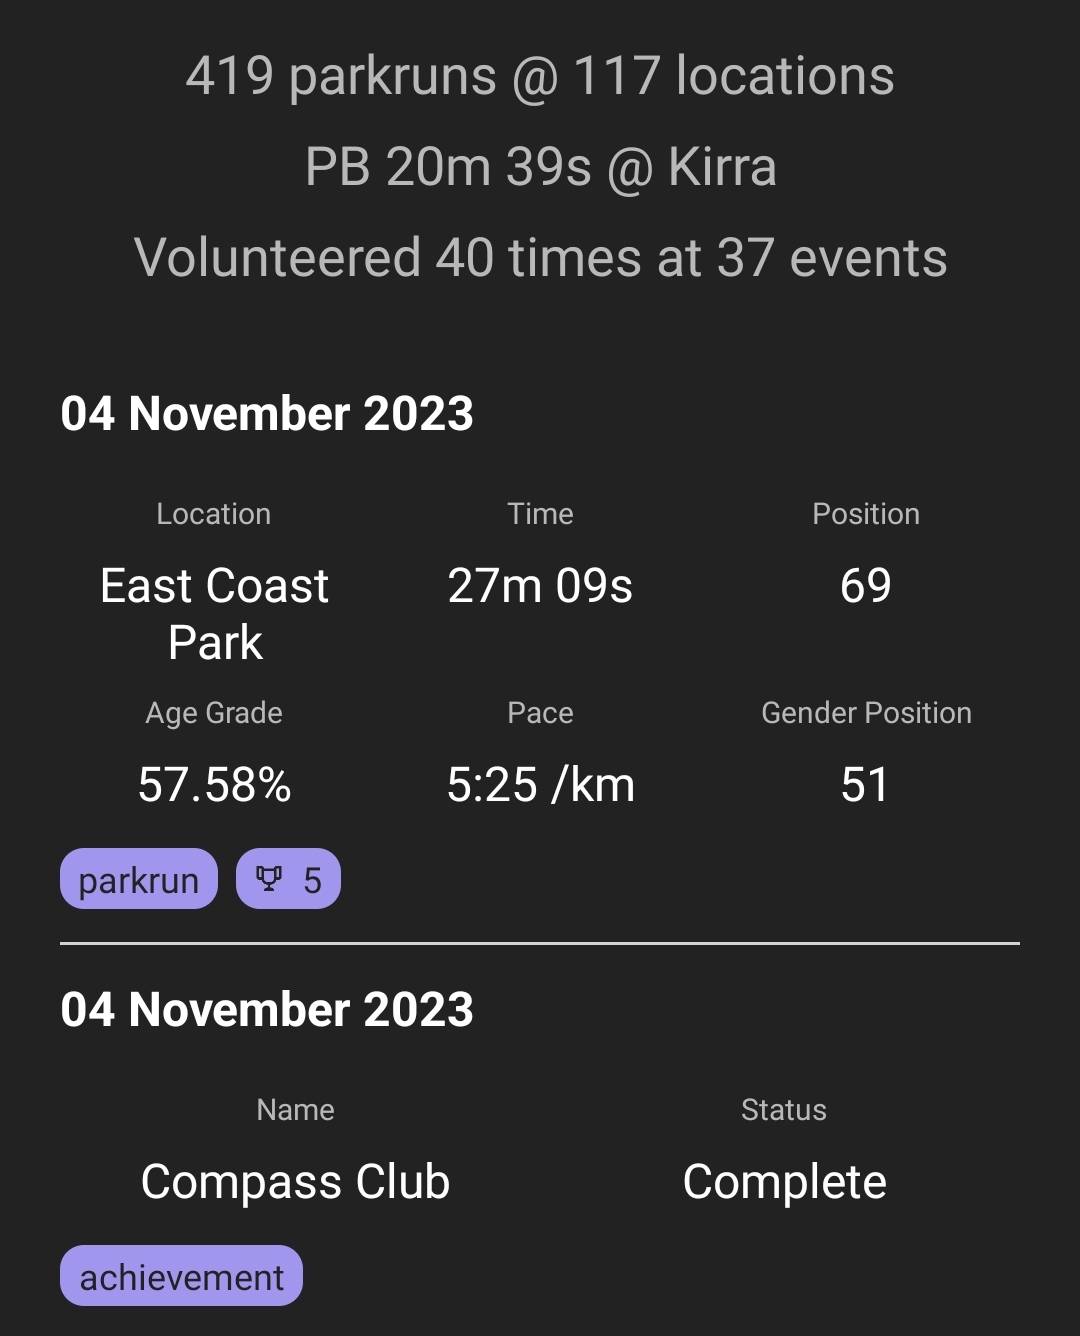 As usual we arrived at the airport early and made use of the time parkrun faffing, going over the new stats we had just collected. East Coast parkrun had completed my compass club. A parkrun done with all the compass point in the name. Jet setter is now up to 3, my 3rd international parkrun done. Freyne club is my 116th different parkrun.